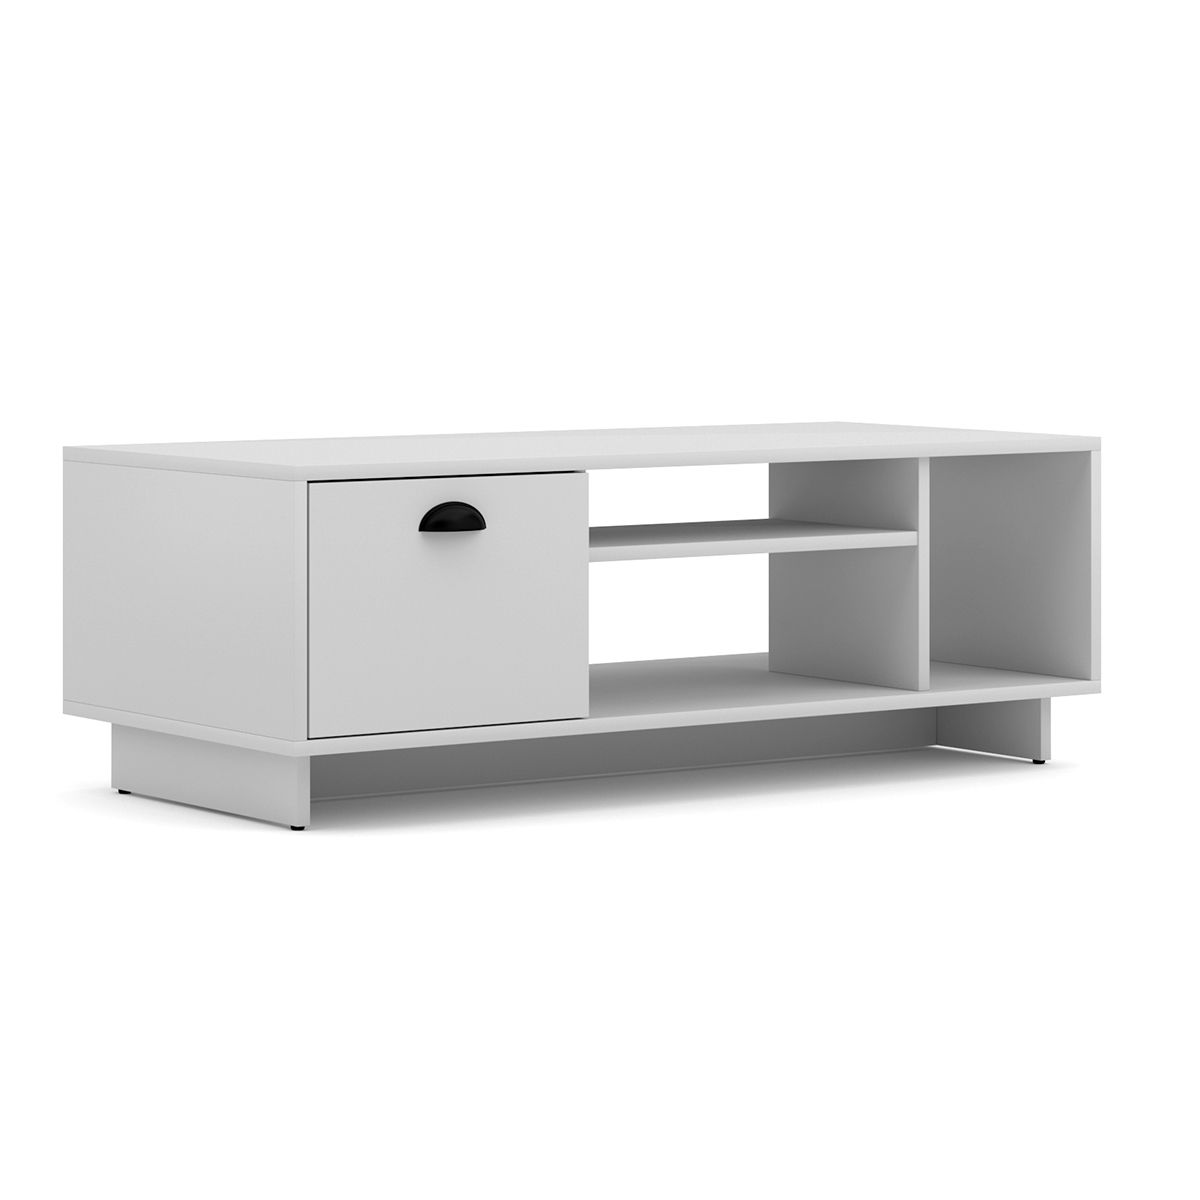 Table basse 1 porte 3 niches Heres Blanc